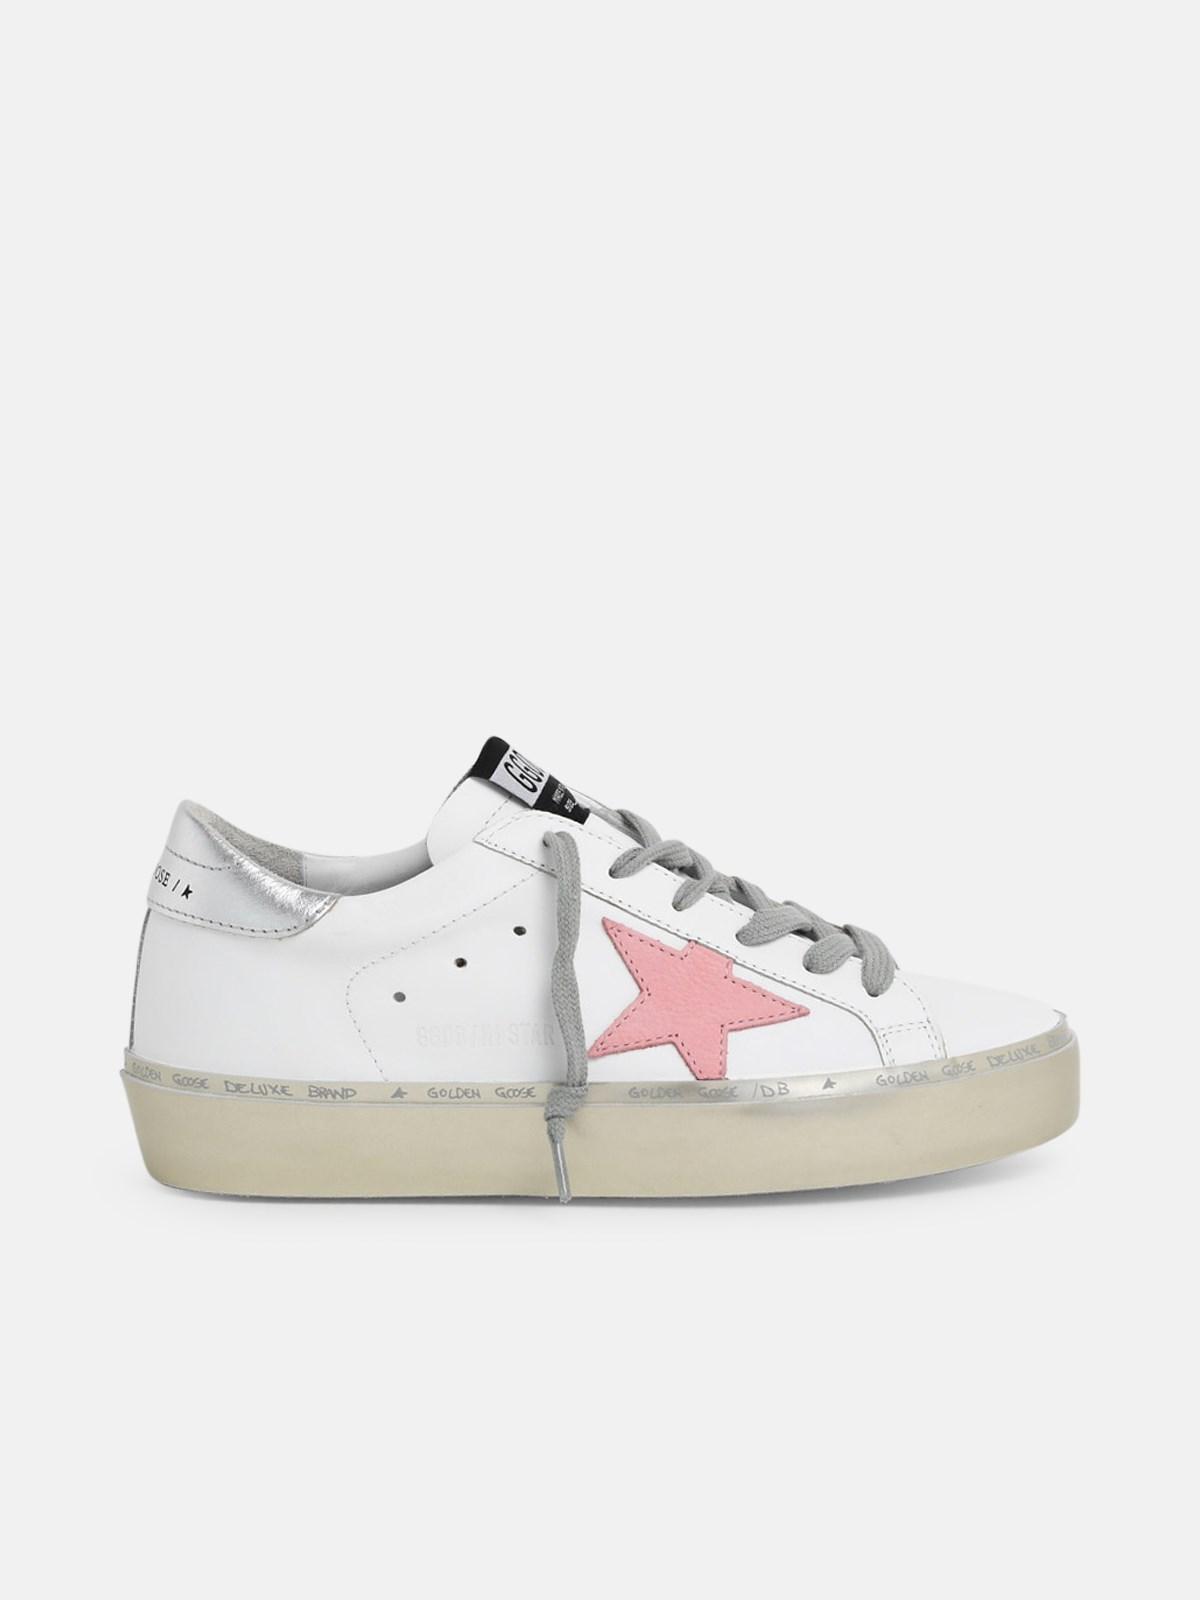 Golden Goose Deluxe Brand Leather Sneakers Hi Star Stella Rosa in White ...